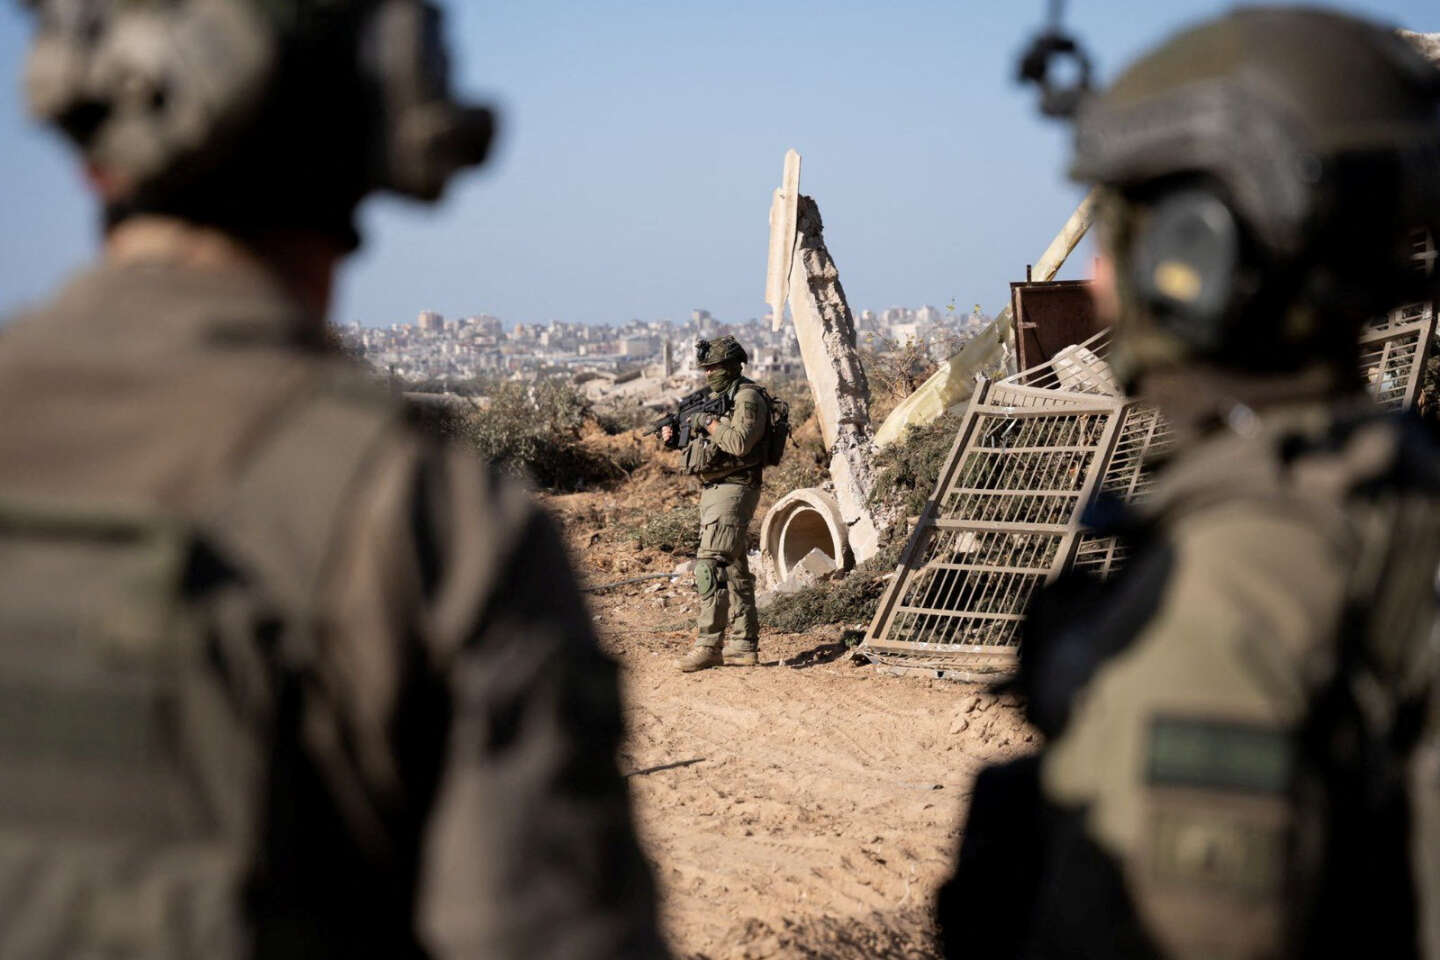 The Israeli army lost 24 soldiers in a single day in the Gaza Strip